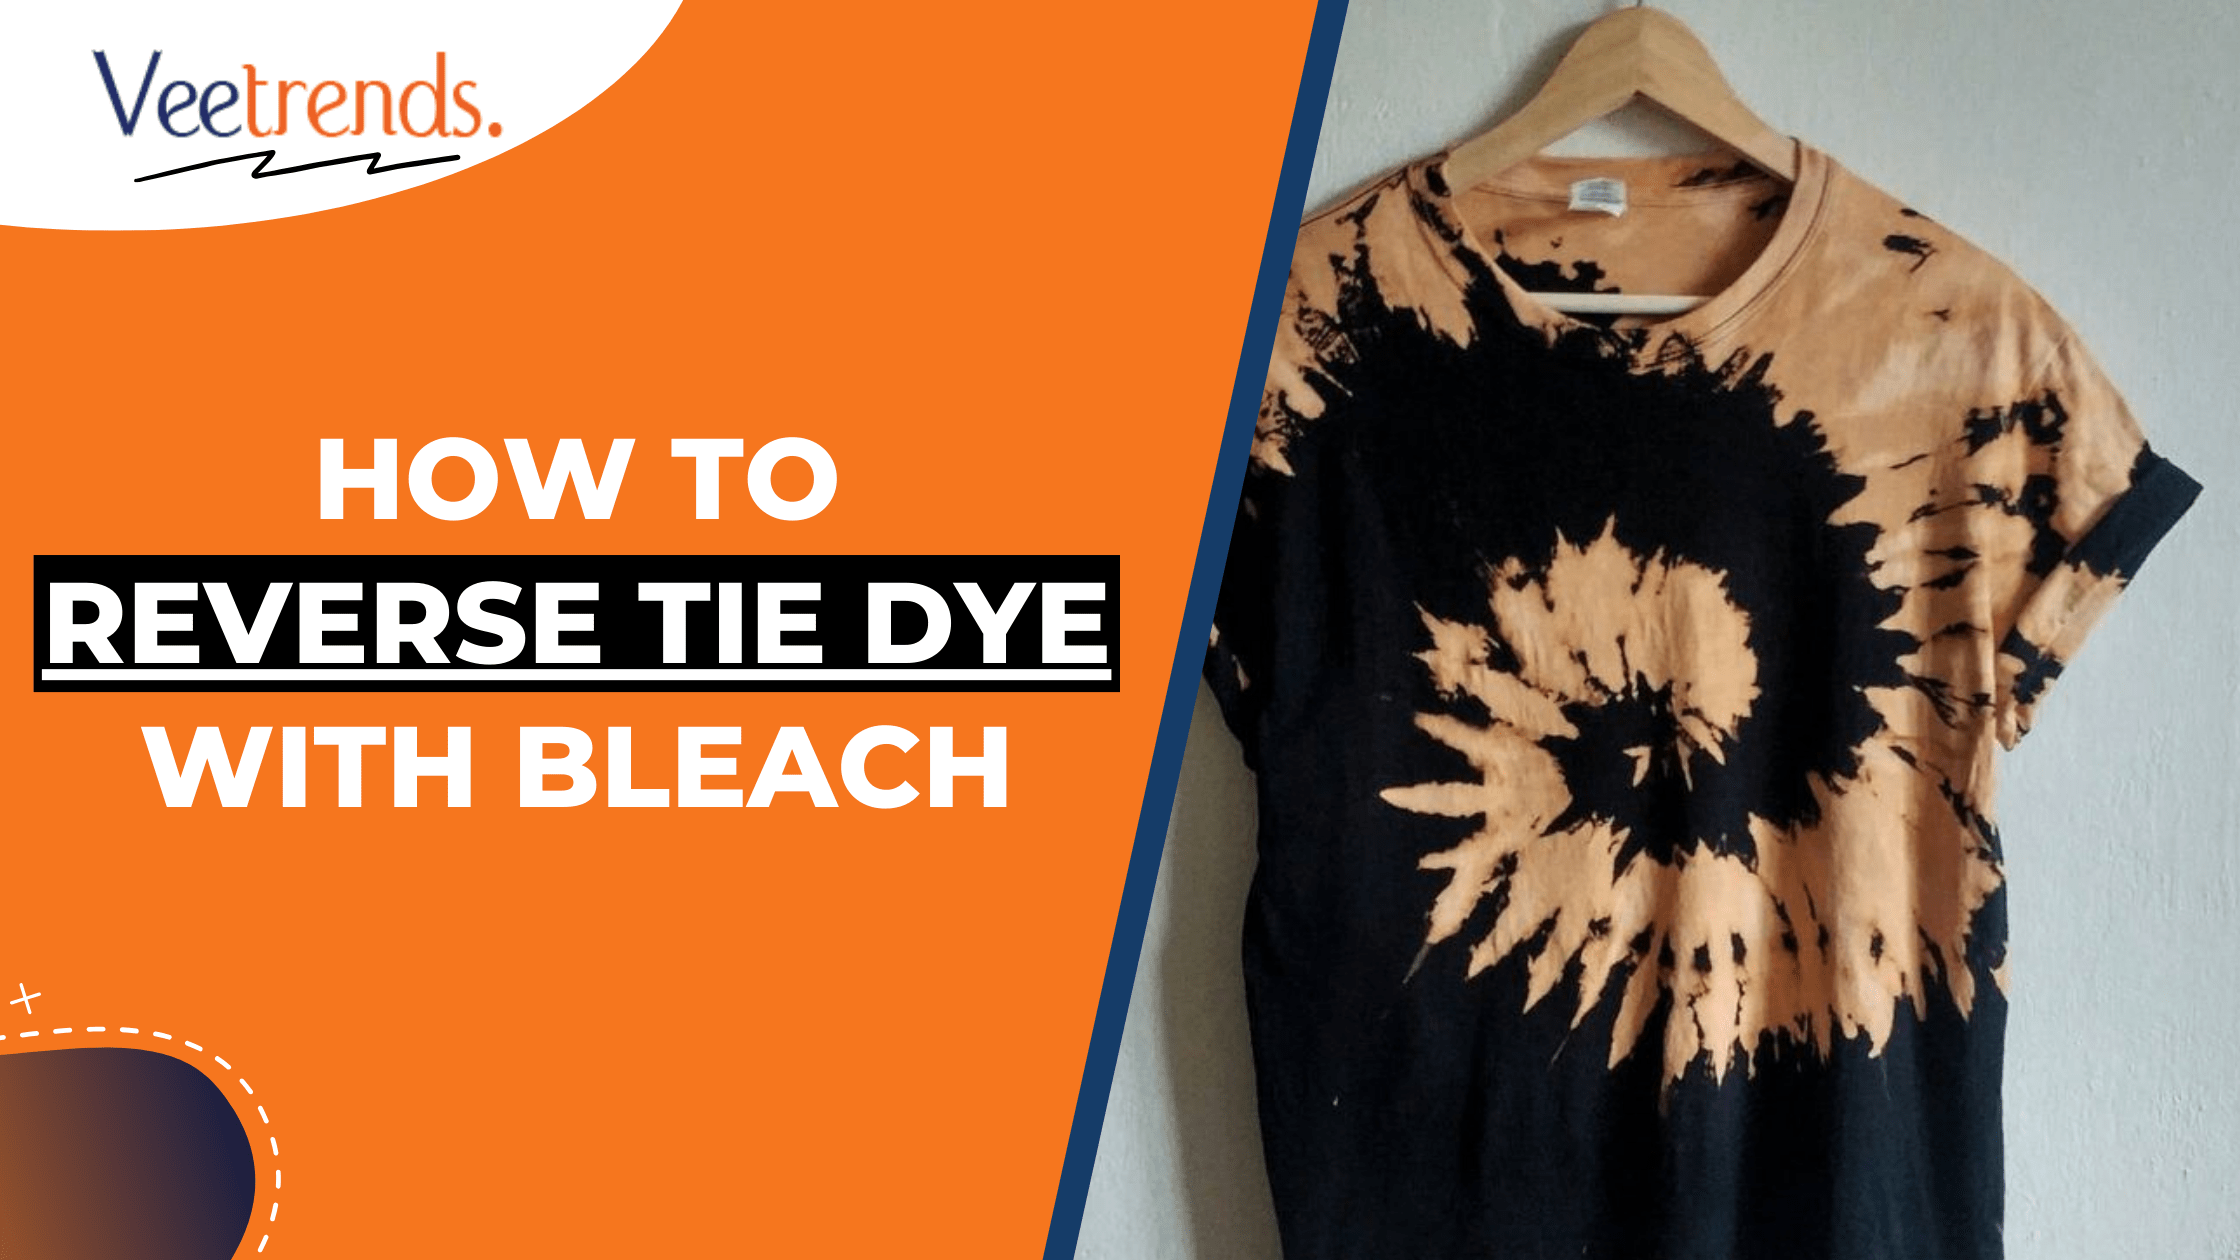 How to Reverse Tie Dye with Bleach (11 Easy Steps to Follow)